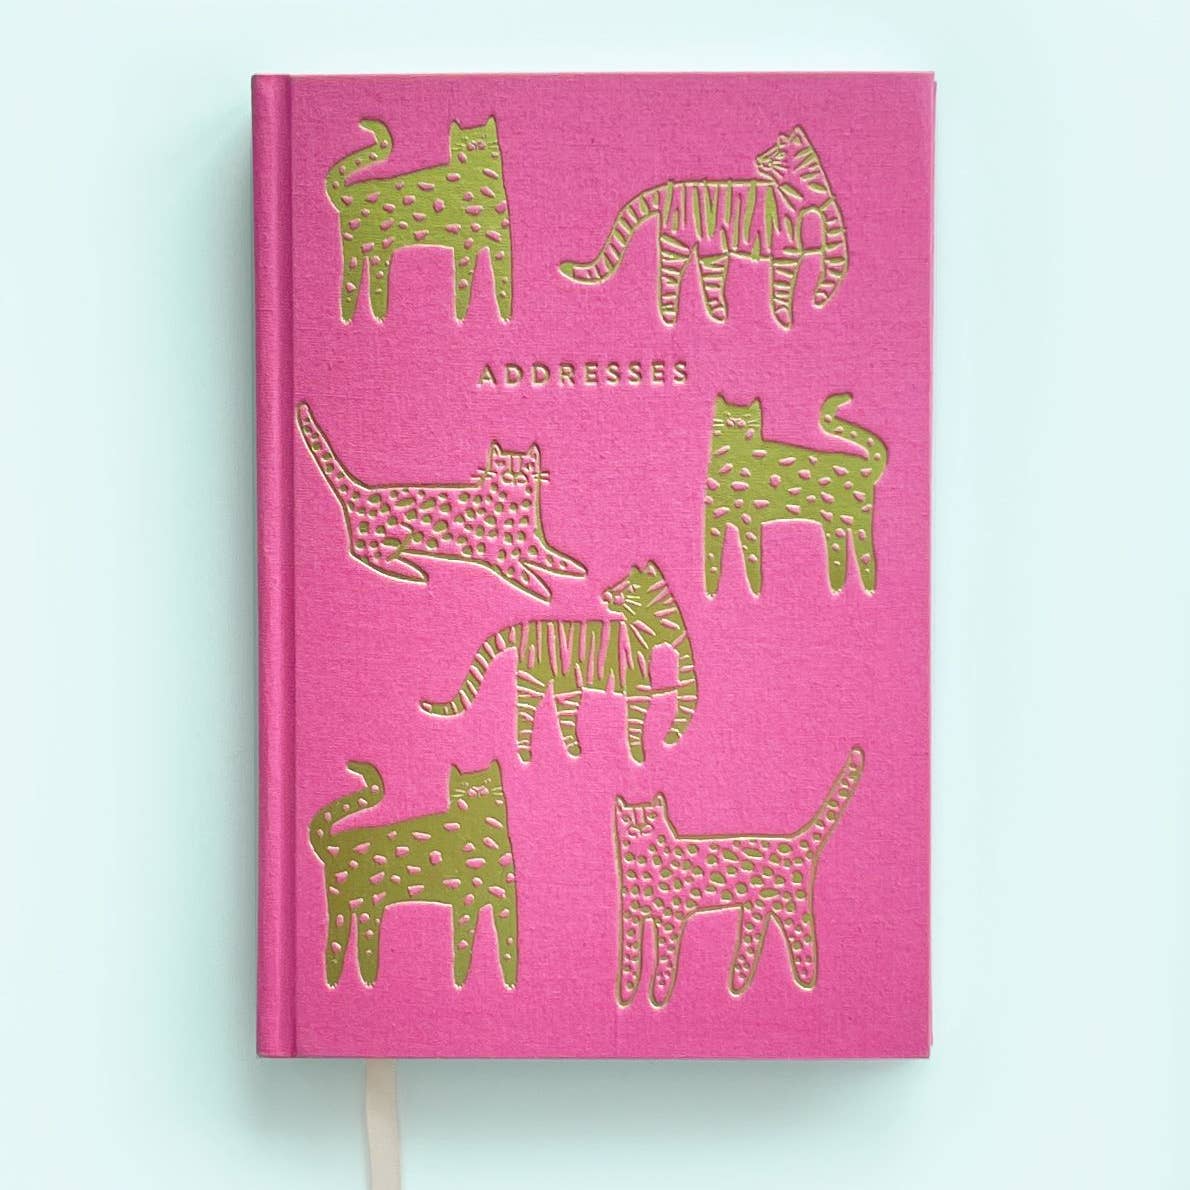 Pink background with images of gold foil tigers and jaguars with gold foil text says, "Addresses".